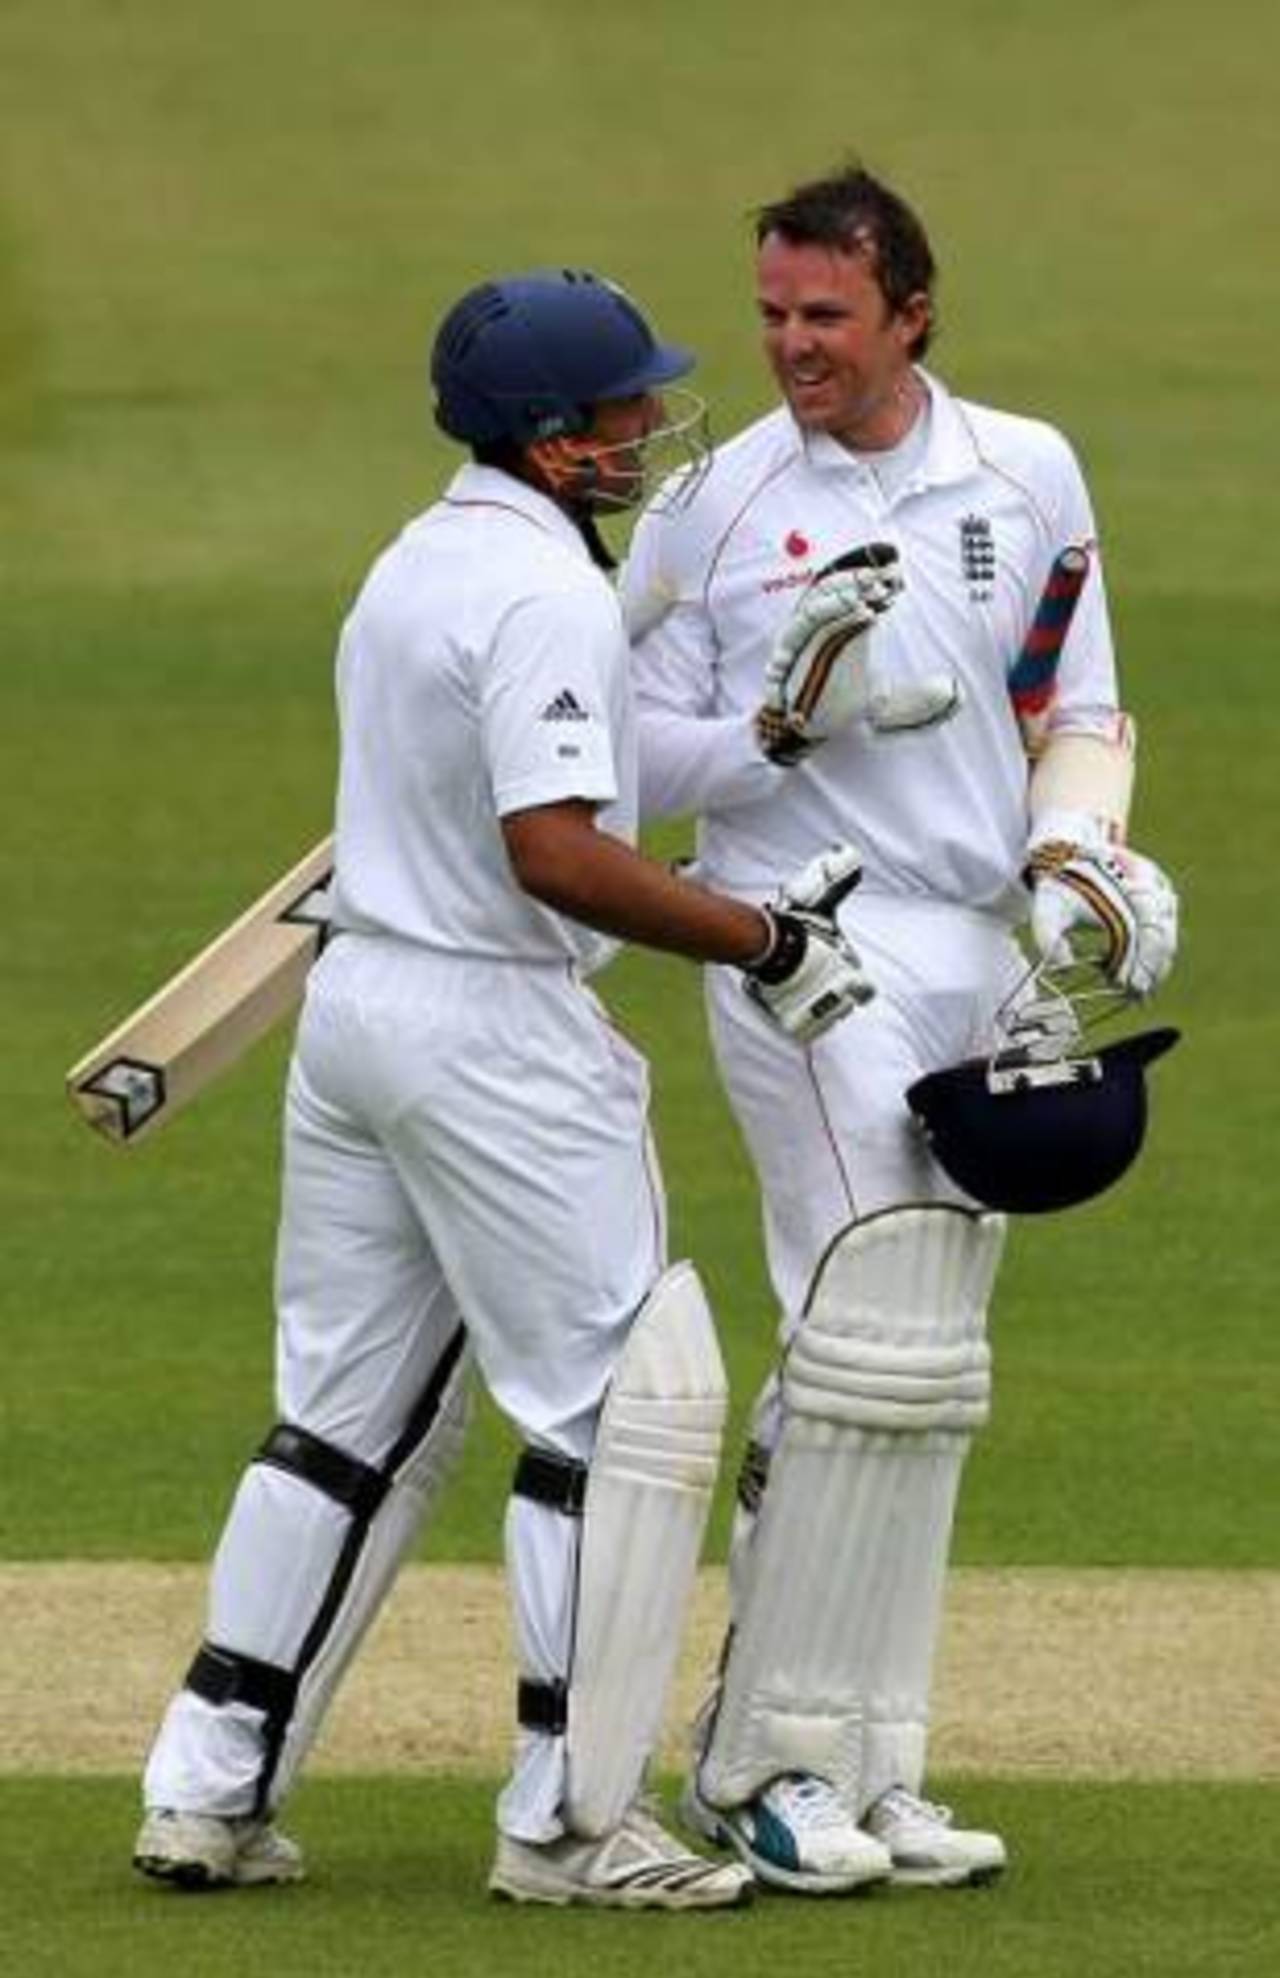 Graeme Swann cracked his maiden Test fifty while Ravi Bopara (left) made 143 in his first attempt at No.3&nbsp;&nbsp;&bull;&nbsp;&nbsp;Getty Images